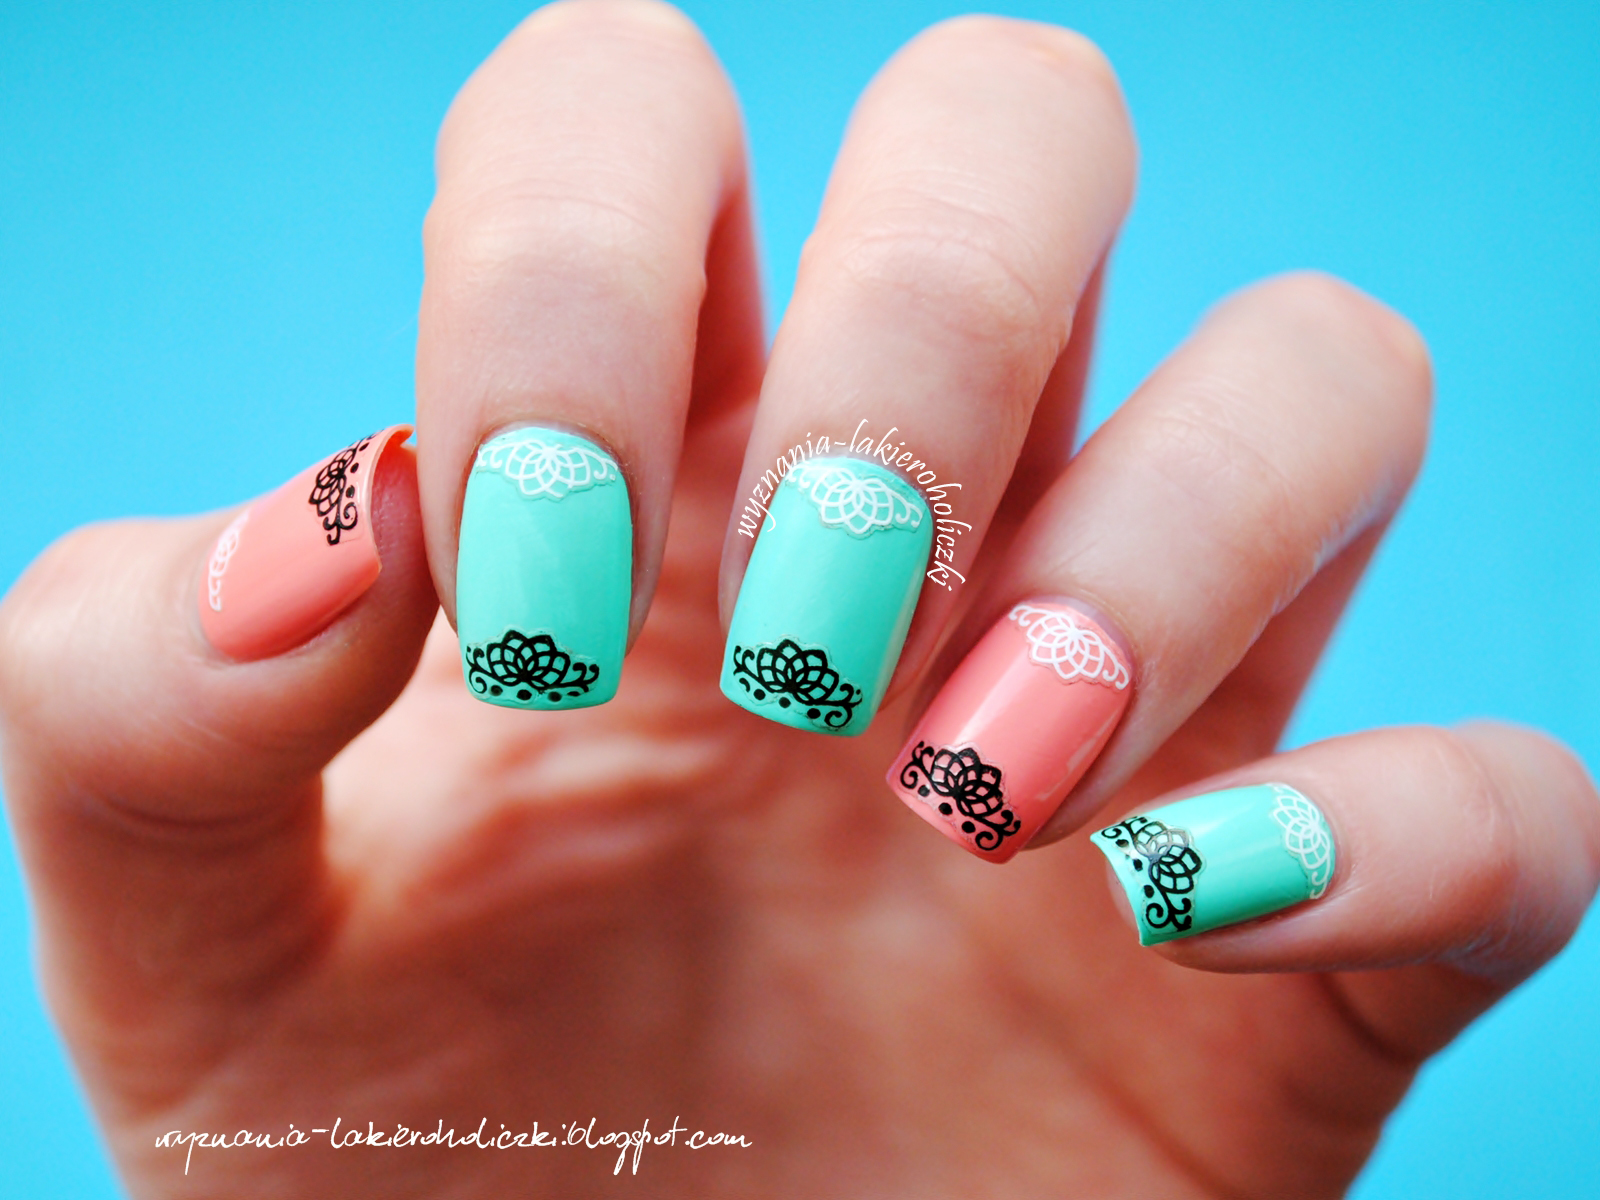 1. Lace Nail Art Designs - wide 3